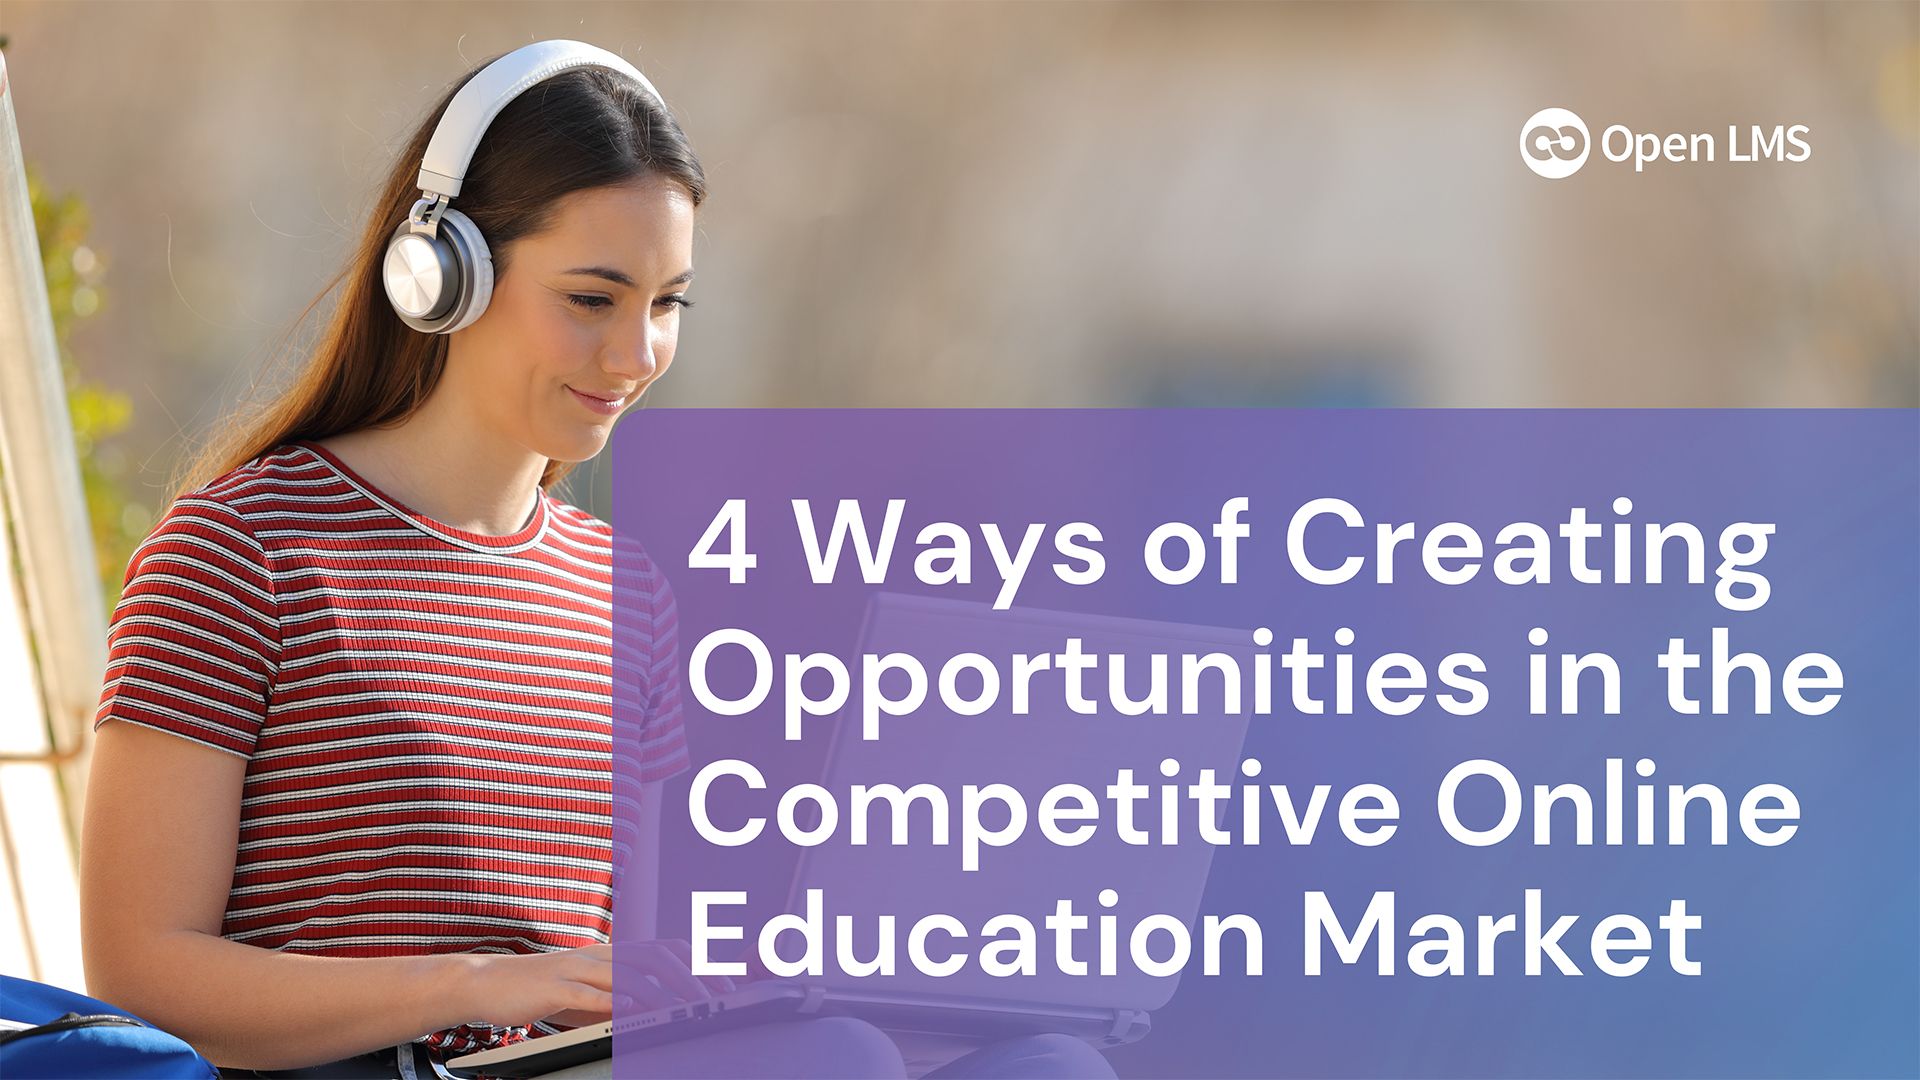 4 Ways of Creating Opportunities in the Competitive Online Education Market